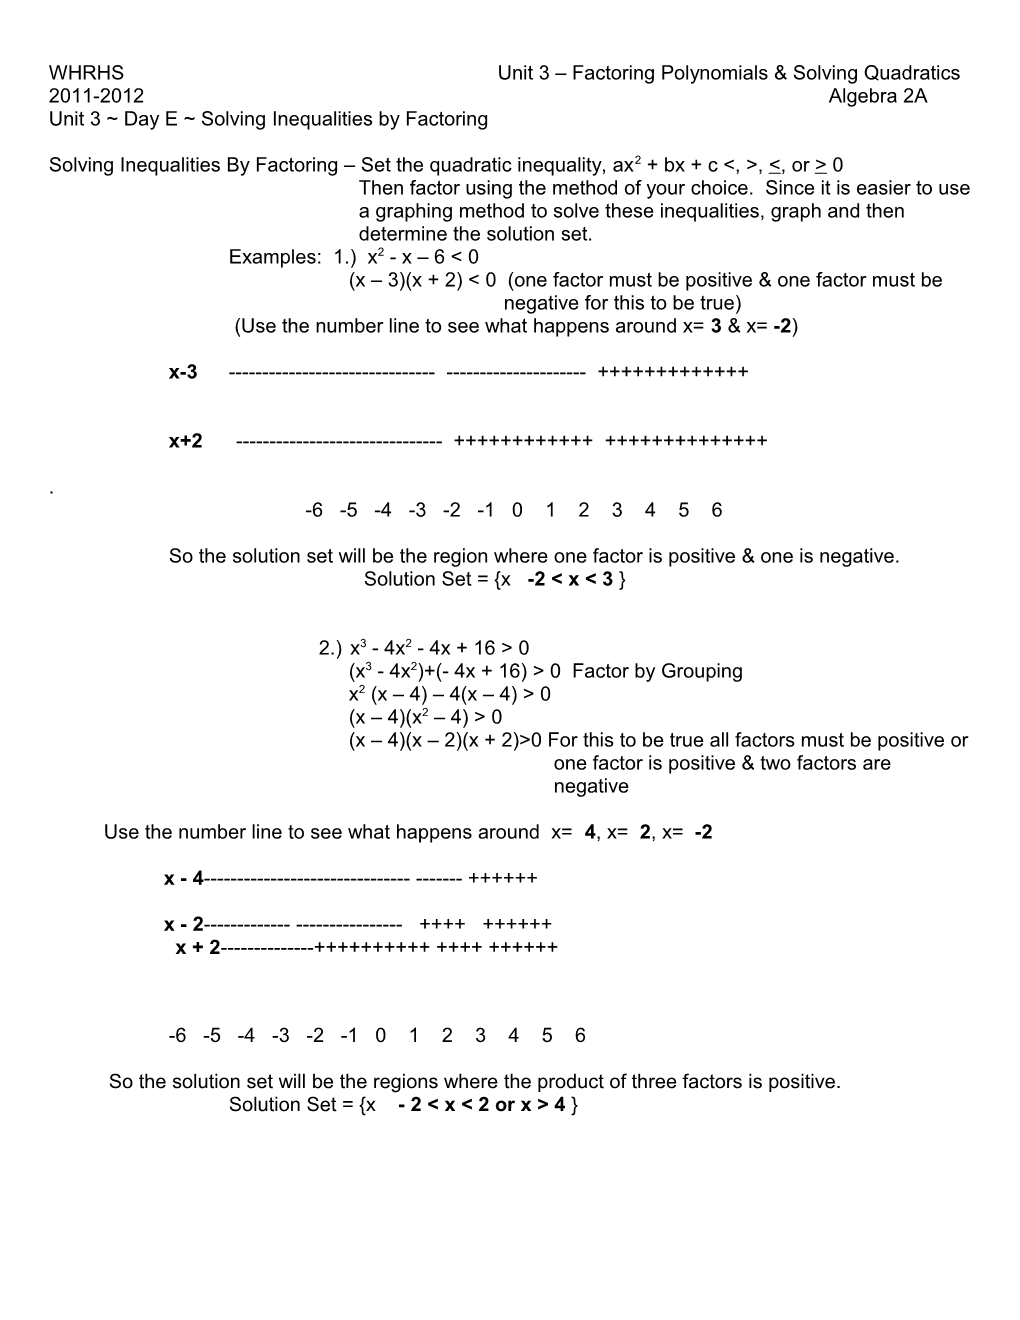 Solving Equations by Factoring